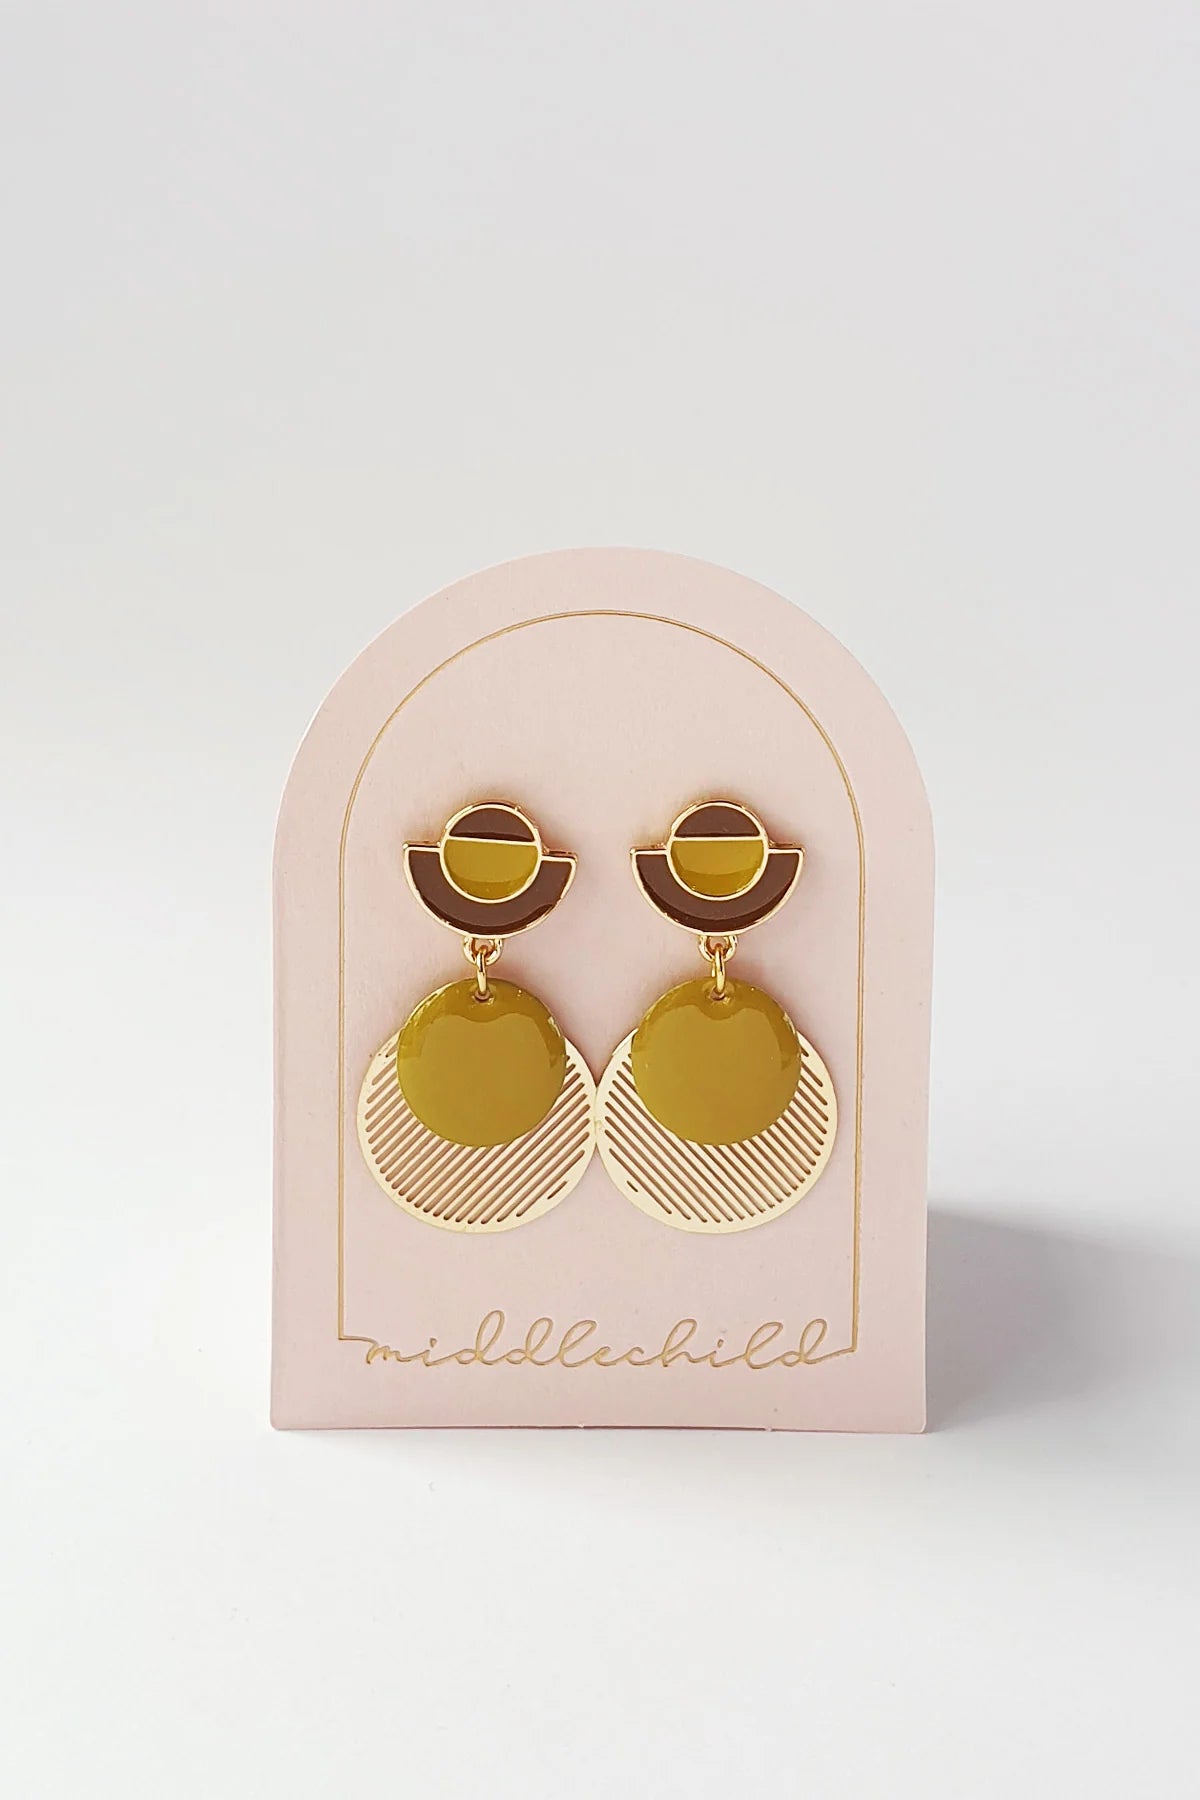 Middle Child - Sixpence Earrings